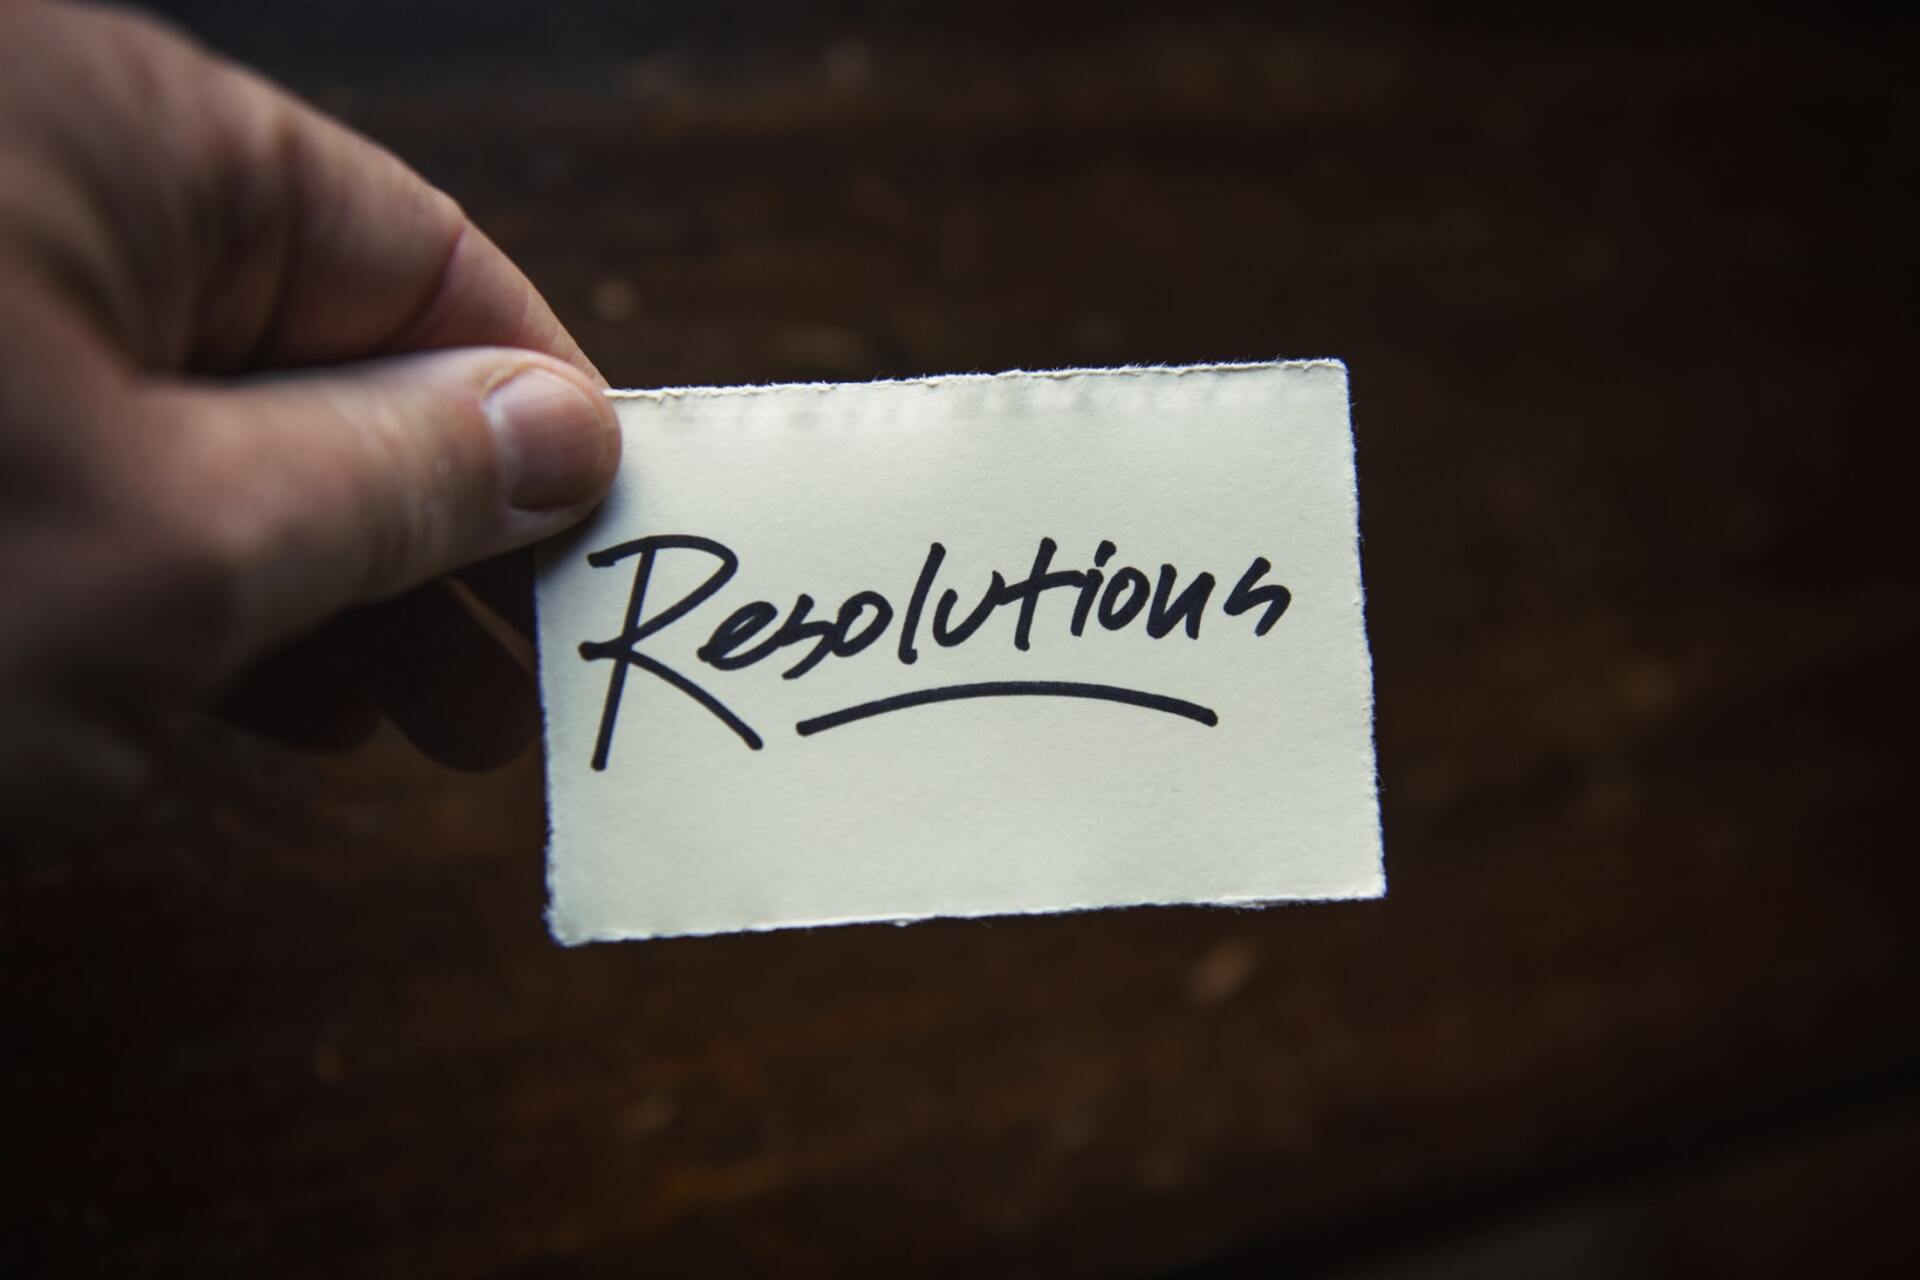 Resolutions hand written as a reminder on card